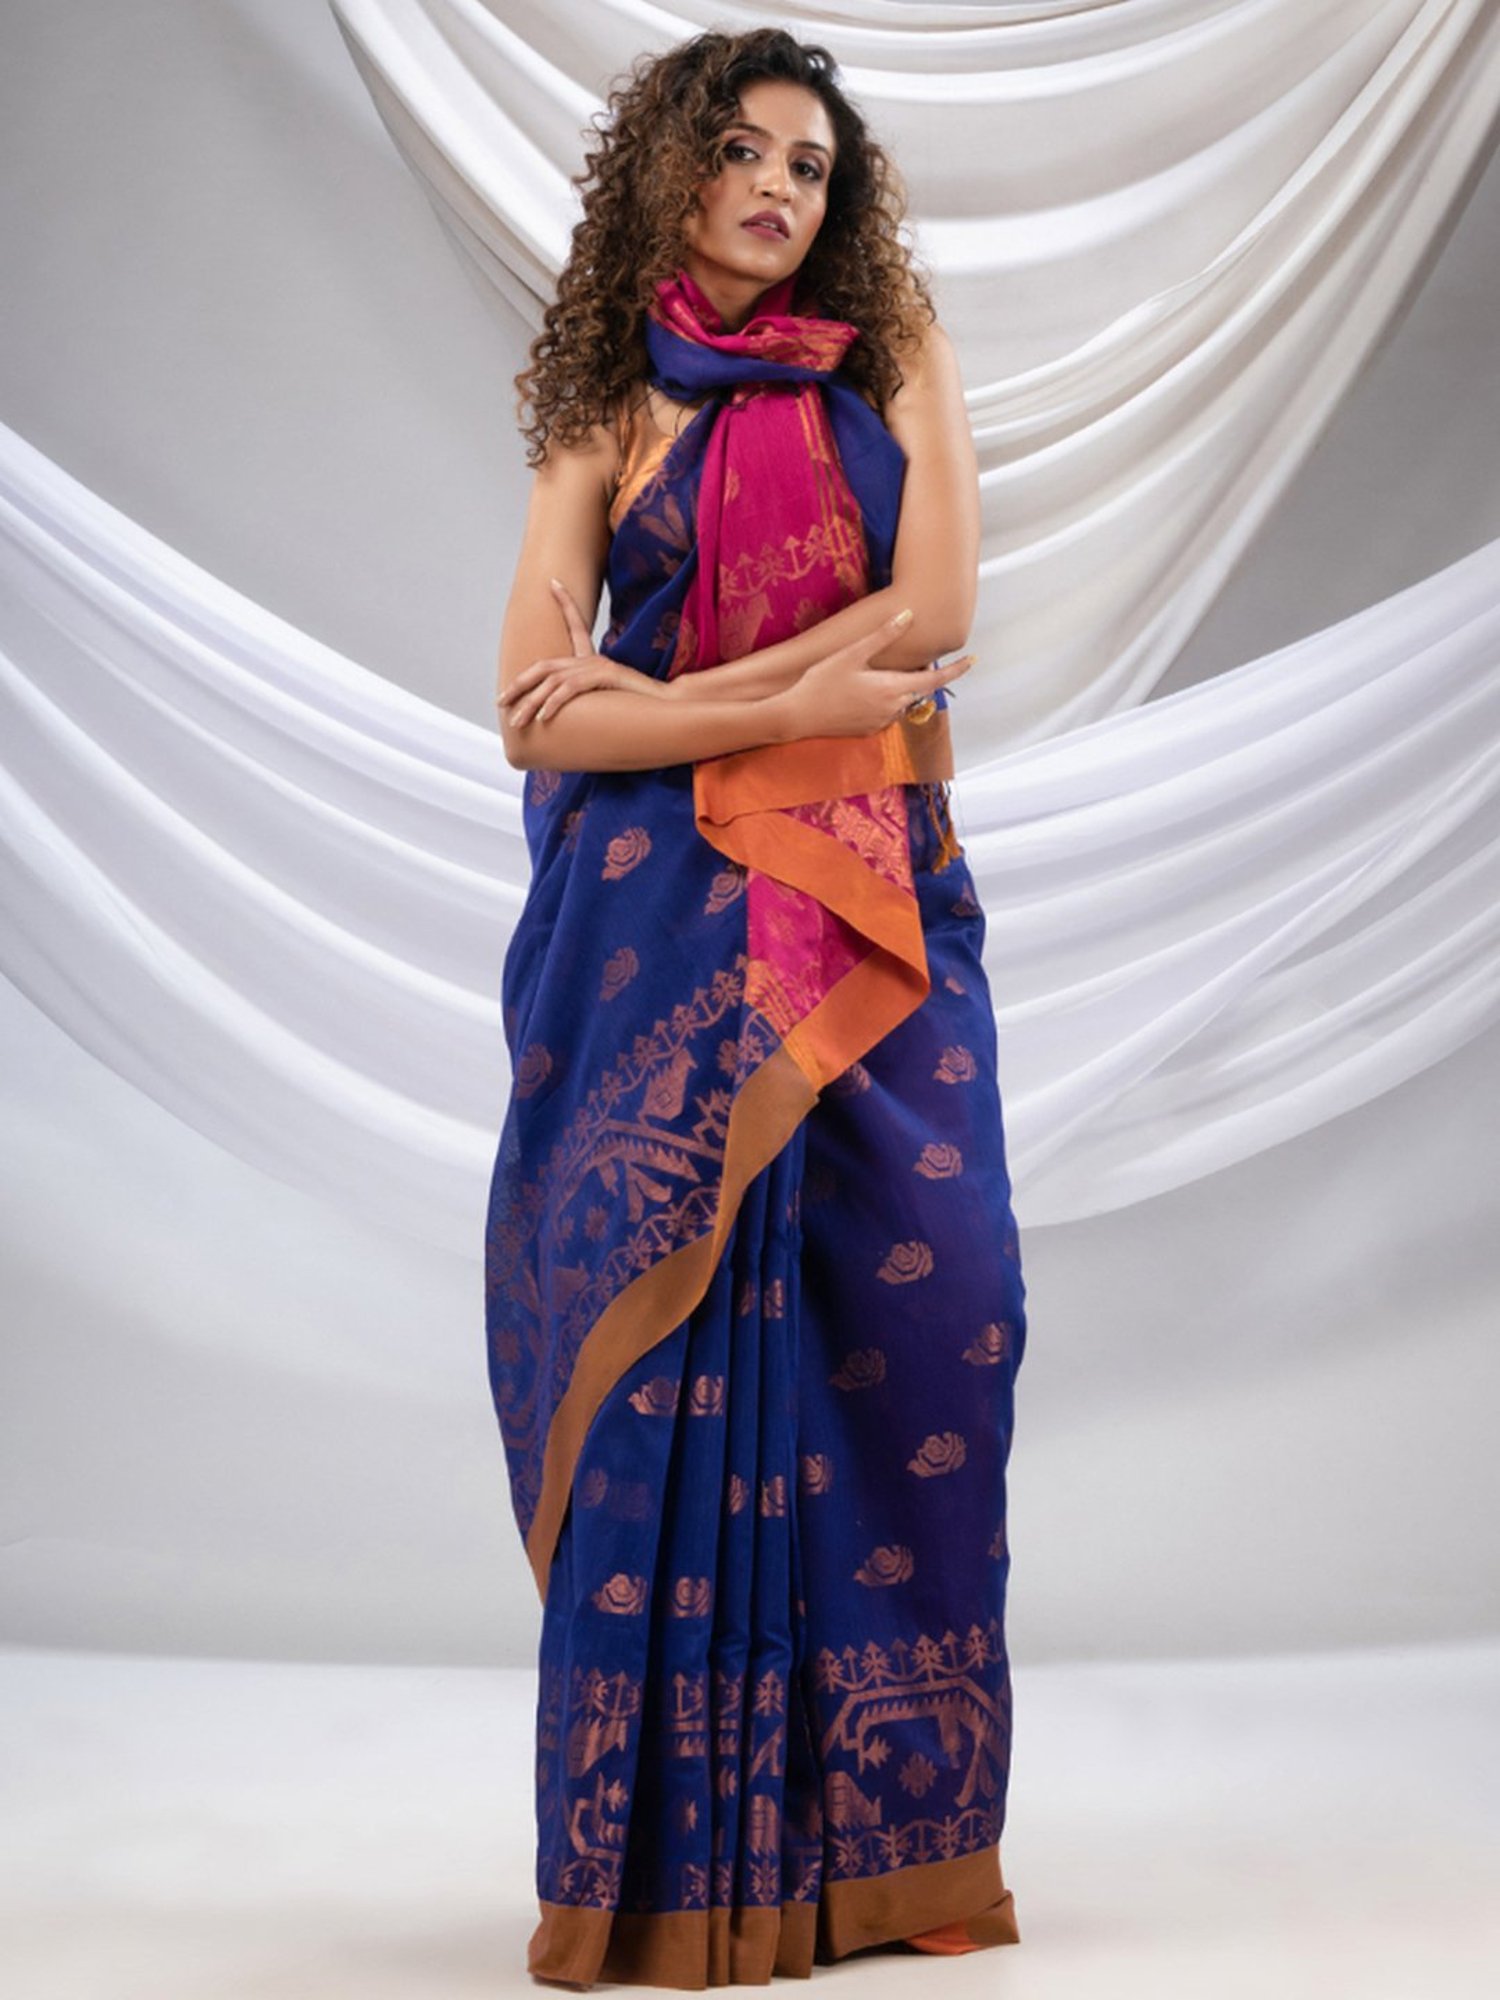 Royal Blue Saree With Lovely Pink Roohi Vol 1